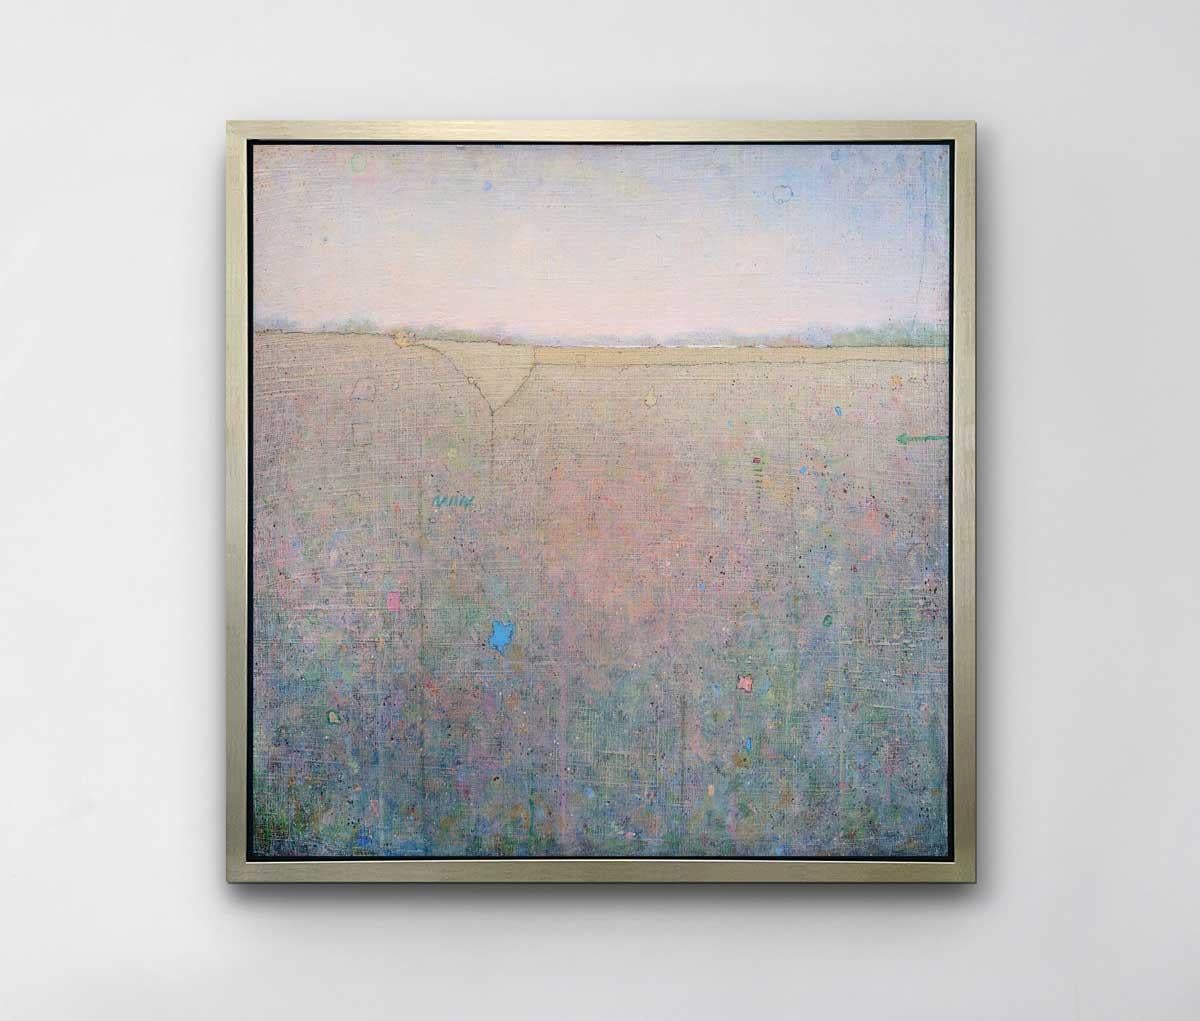 This limited edition print is an abstract landscape by Elwood Howell. It features a high, blurred horizon line - beige with muted green pink, and blue, while above it, muted pink fades into blue.  The pink and blue area below is spattered with small